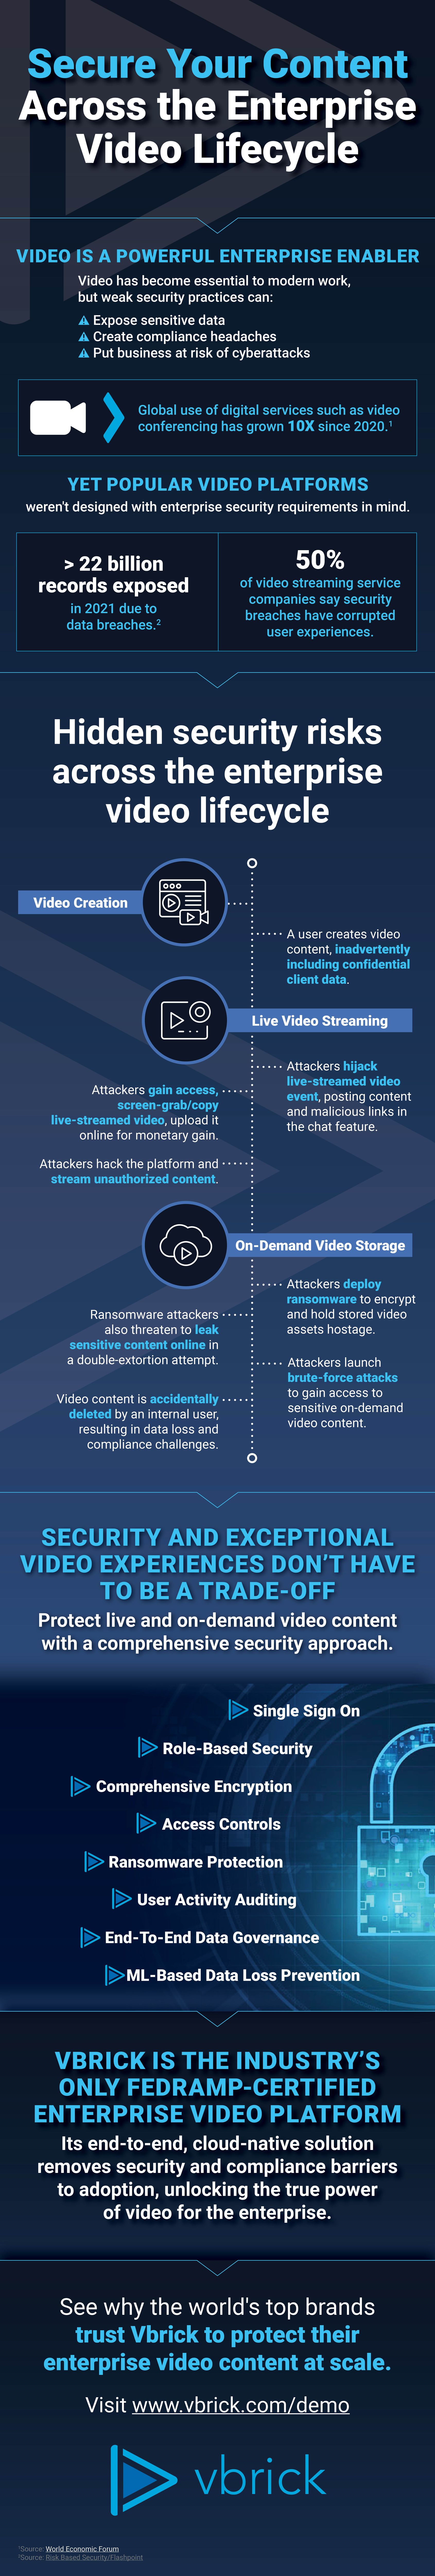 Secure your video content across the enterprise video lifecycle